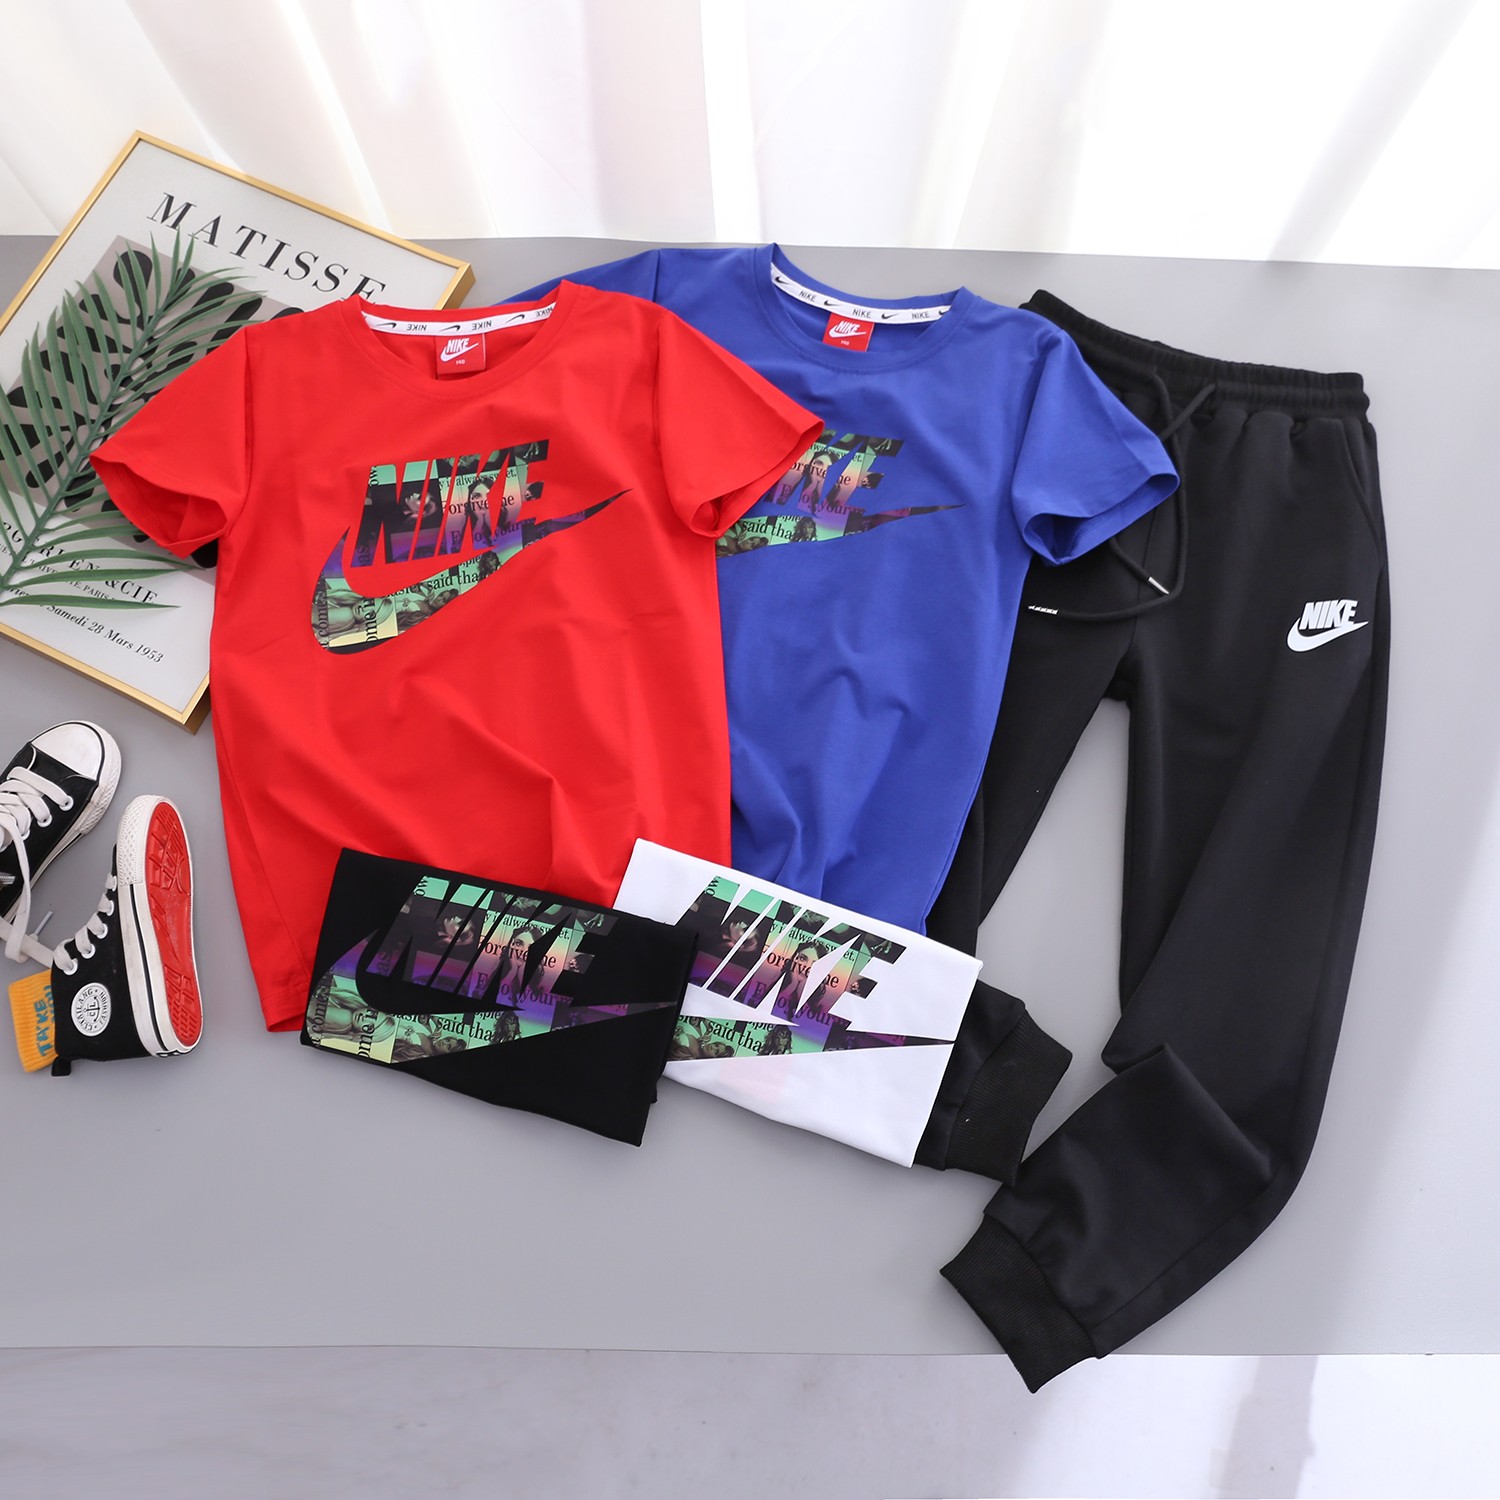 Nike Clothing Pants & Trousers T-Shirt Two Piece Outfits & Matching Sets Black Blue Green Purple Red White Printing Kids Unisex Cotton Spring/Summer Collection Short Sleeve